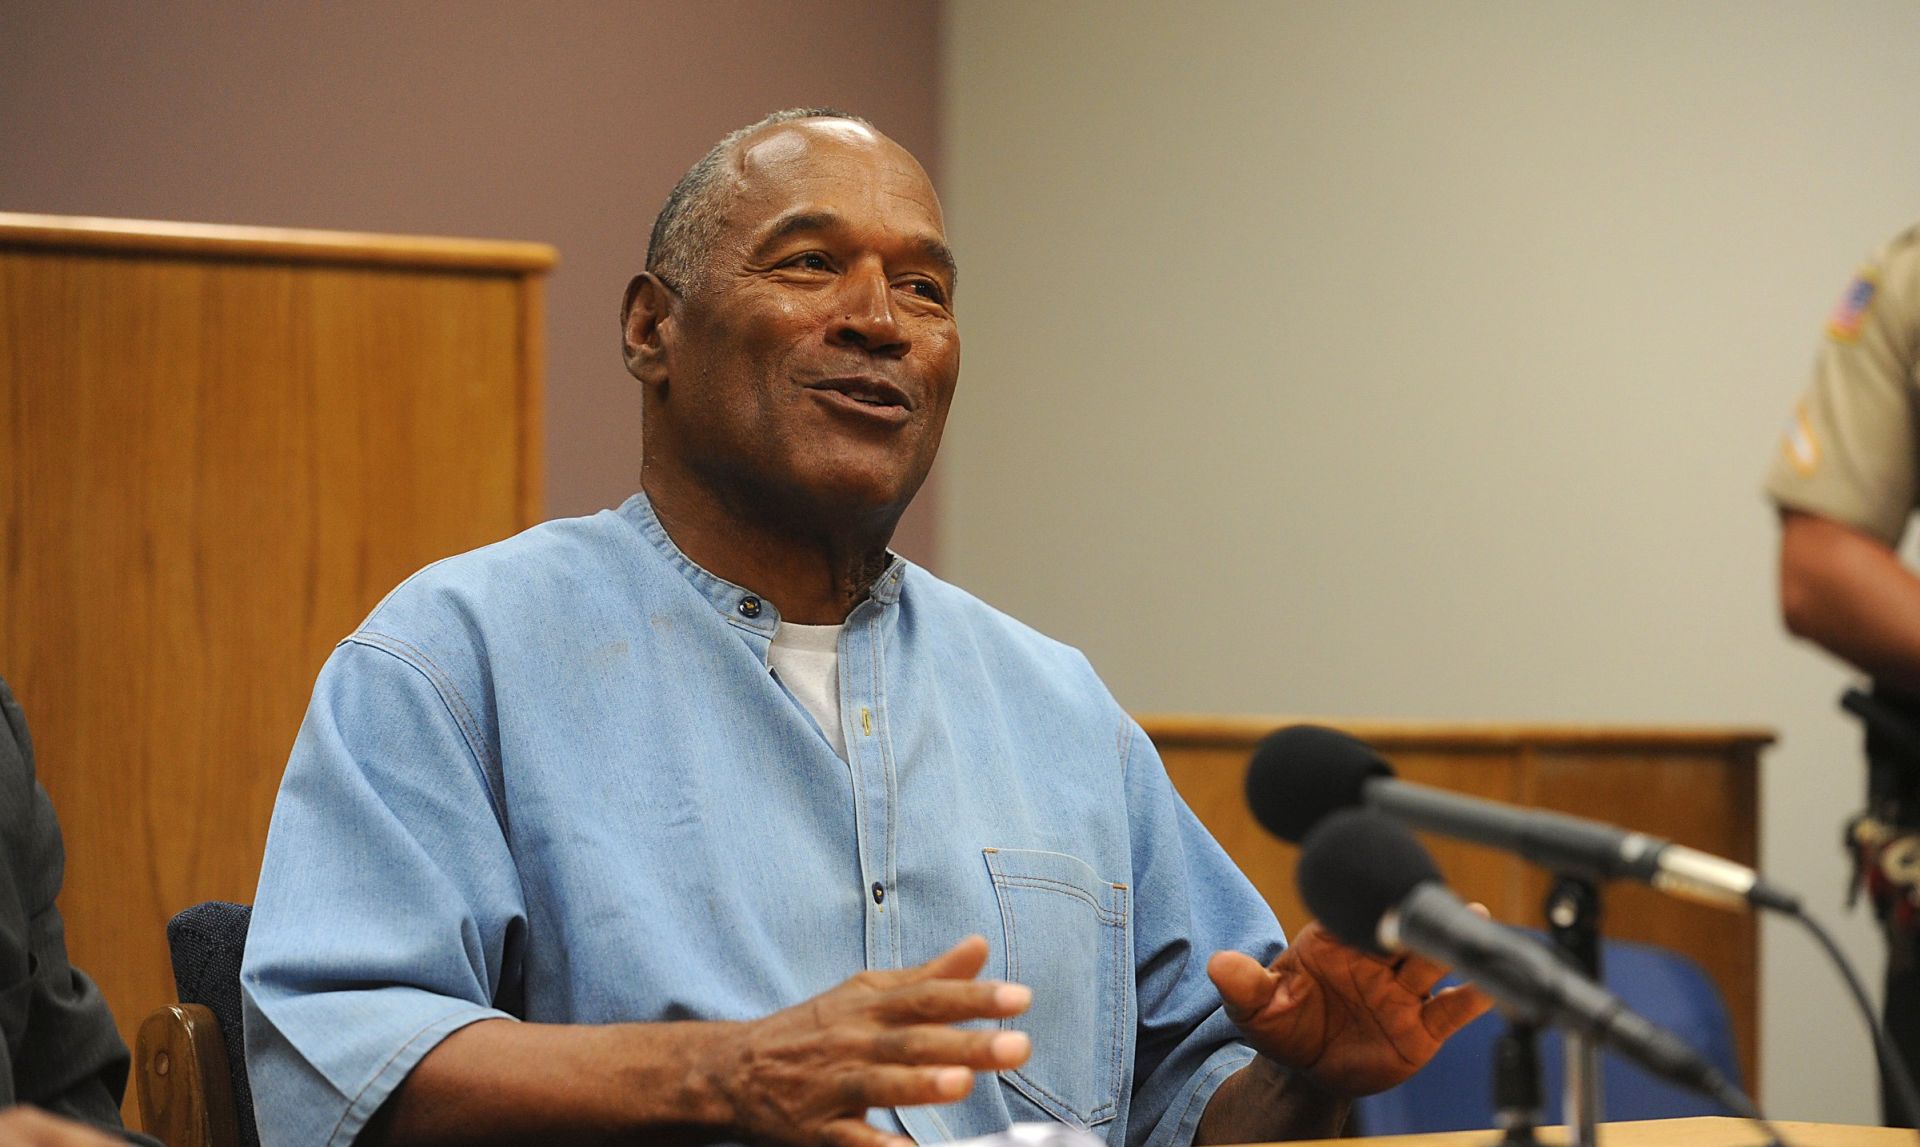 epa06100303 O.J. Simpson attends his parole hearing at Lovelock Correctional Center (LCC), in Lovelock, Nevada, USA, 20 July 2017. Simpson, 70, is serving a nine to 33 year prison term for a 2007 armed robbery and kidnapping conviction.  EPA/JASON BEAN/RENO GAZETTE-JOURNAL / POOL